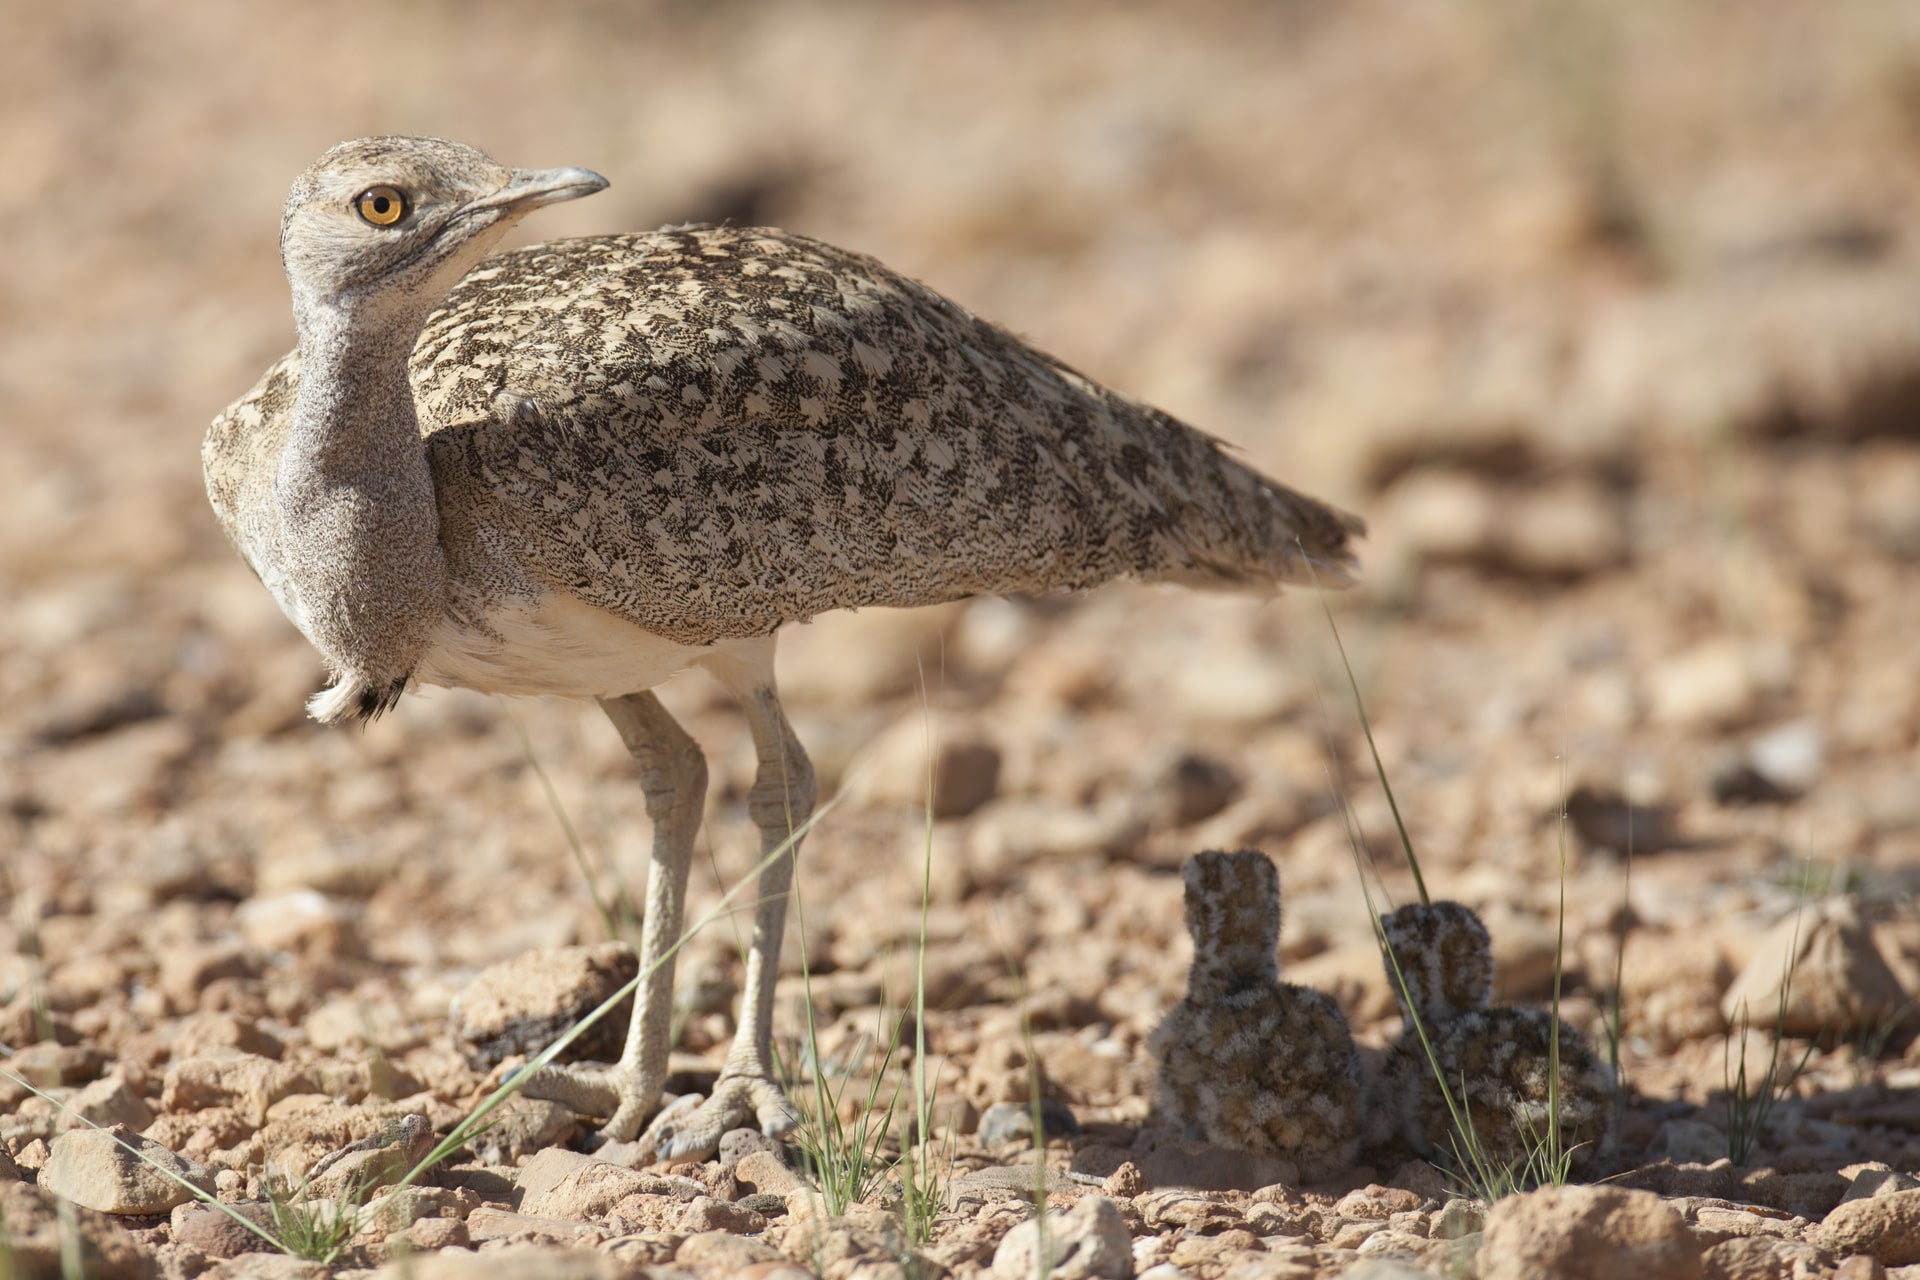 Houbara chicks form a bond with their mother even while they are still in the egg, using calls to communicate